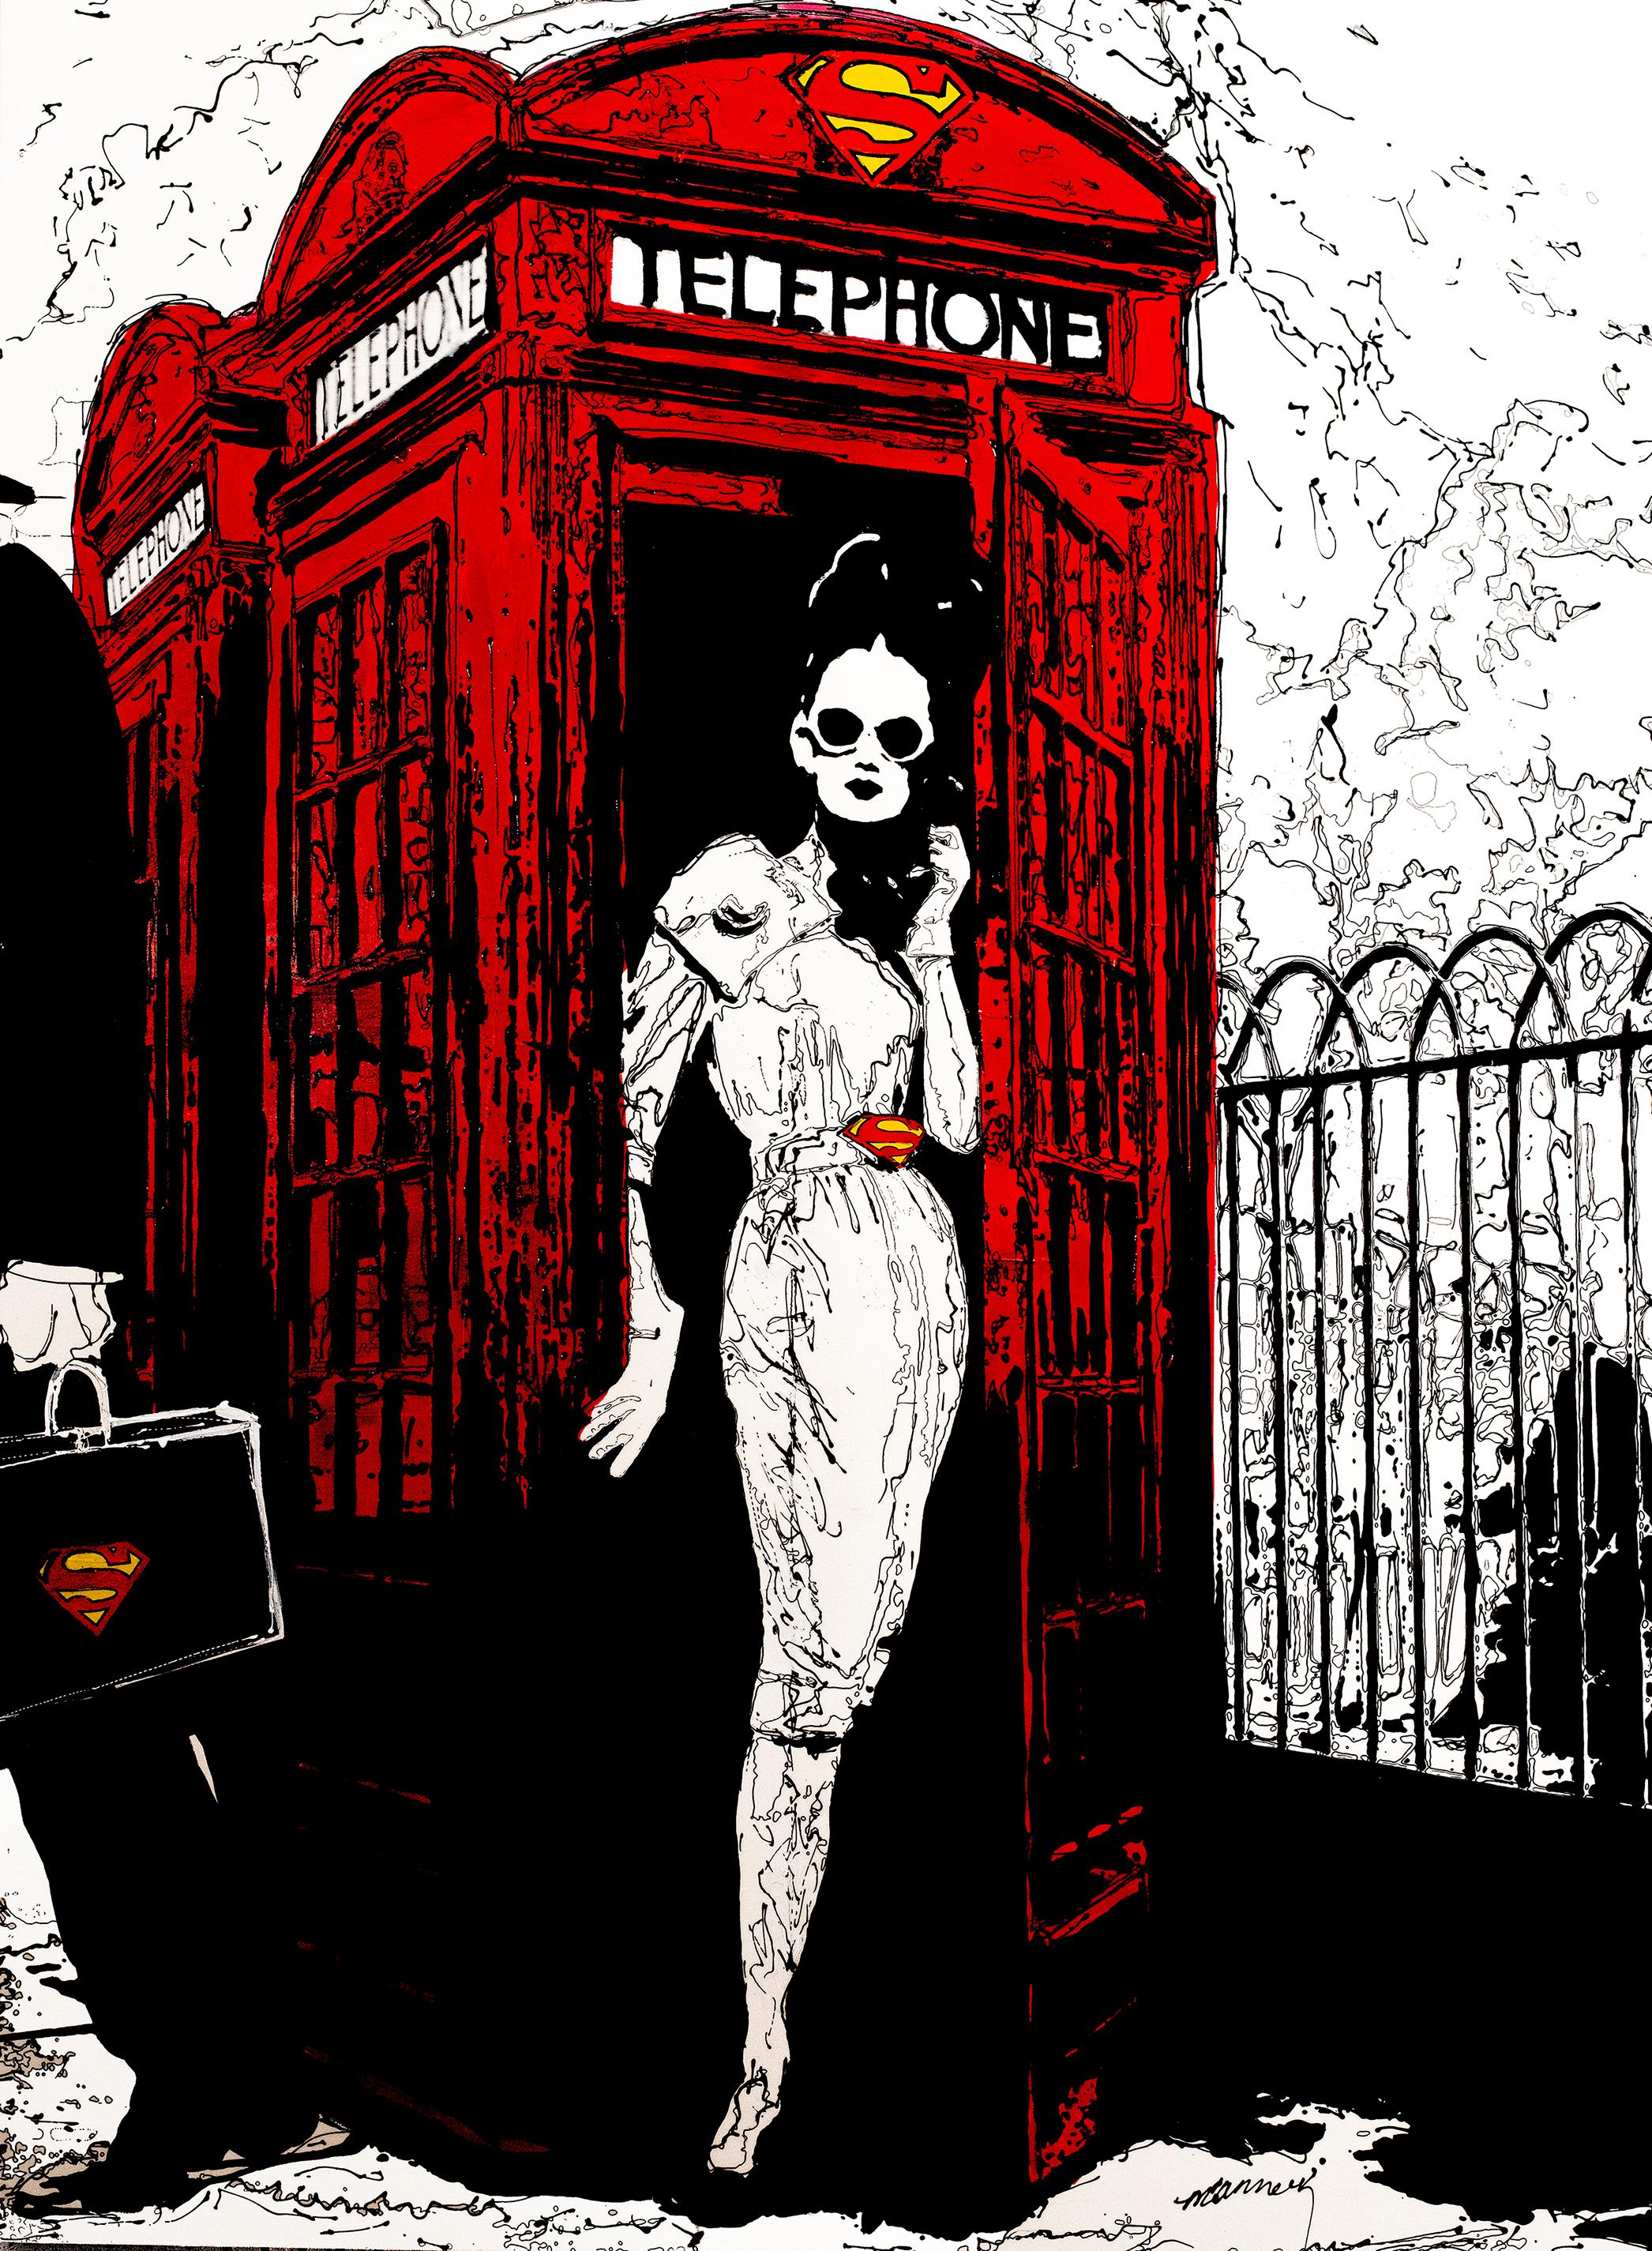 Holly Manneck Figurative Painting - "You Rang Me" a woman poses in a red telephone box wearing sunglasses